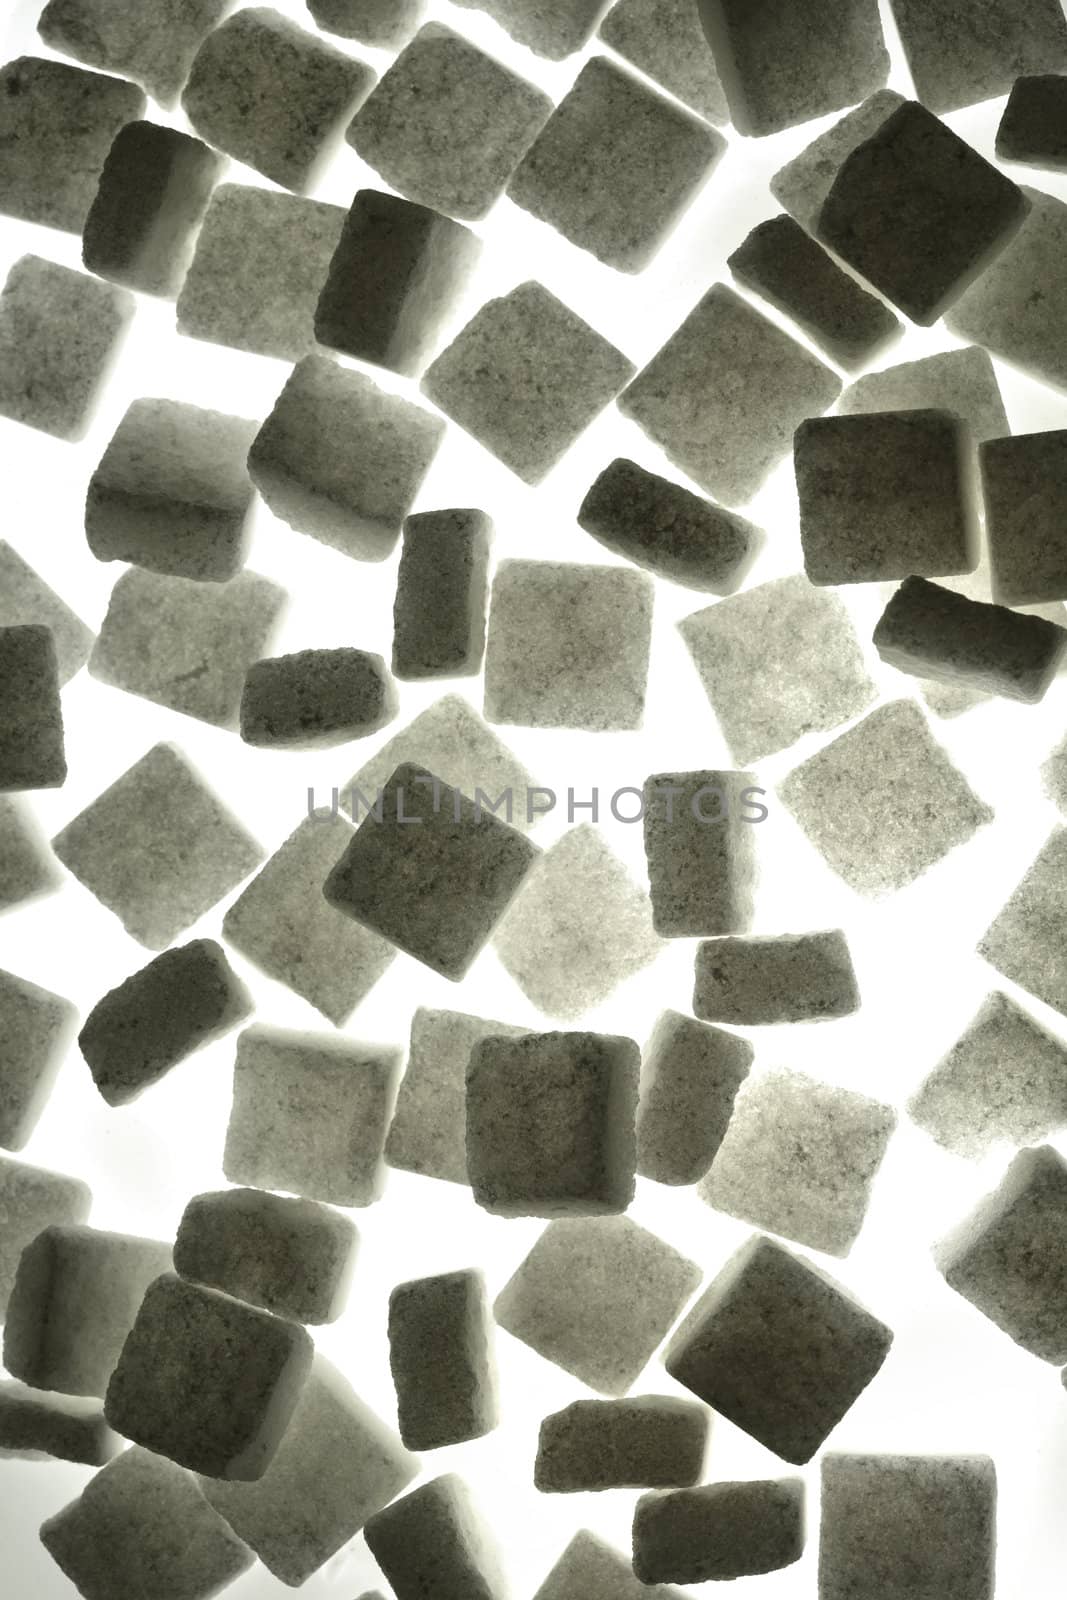 Sugar cubes by Stocksnapper